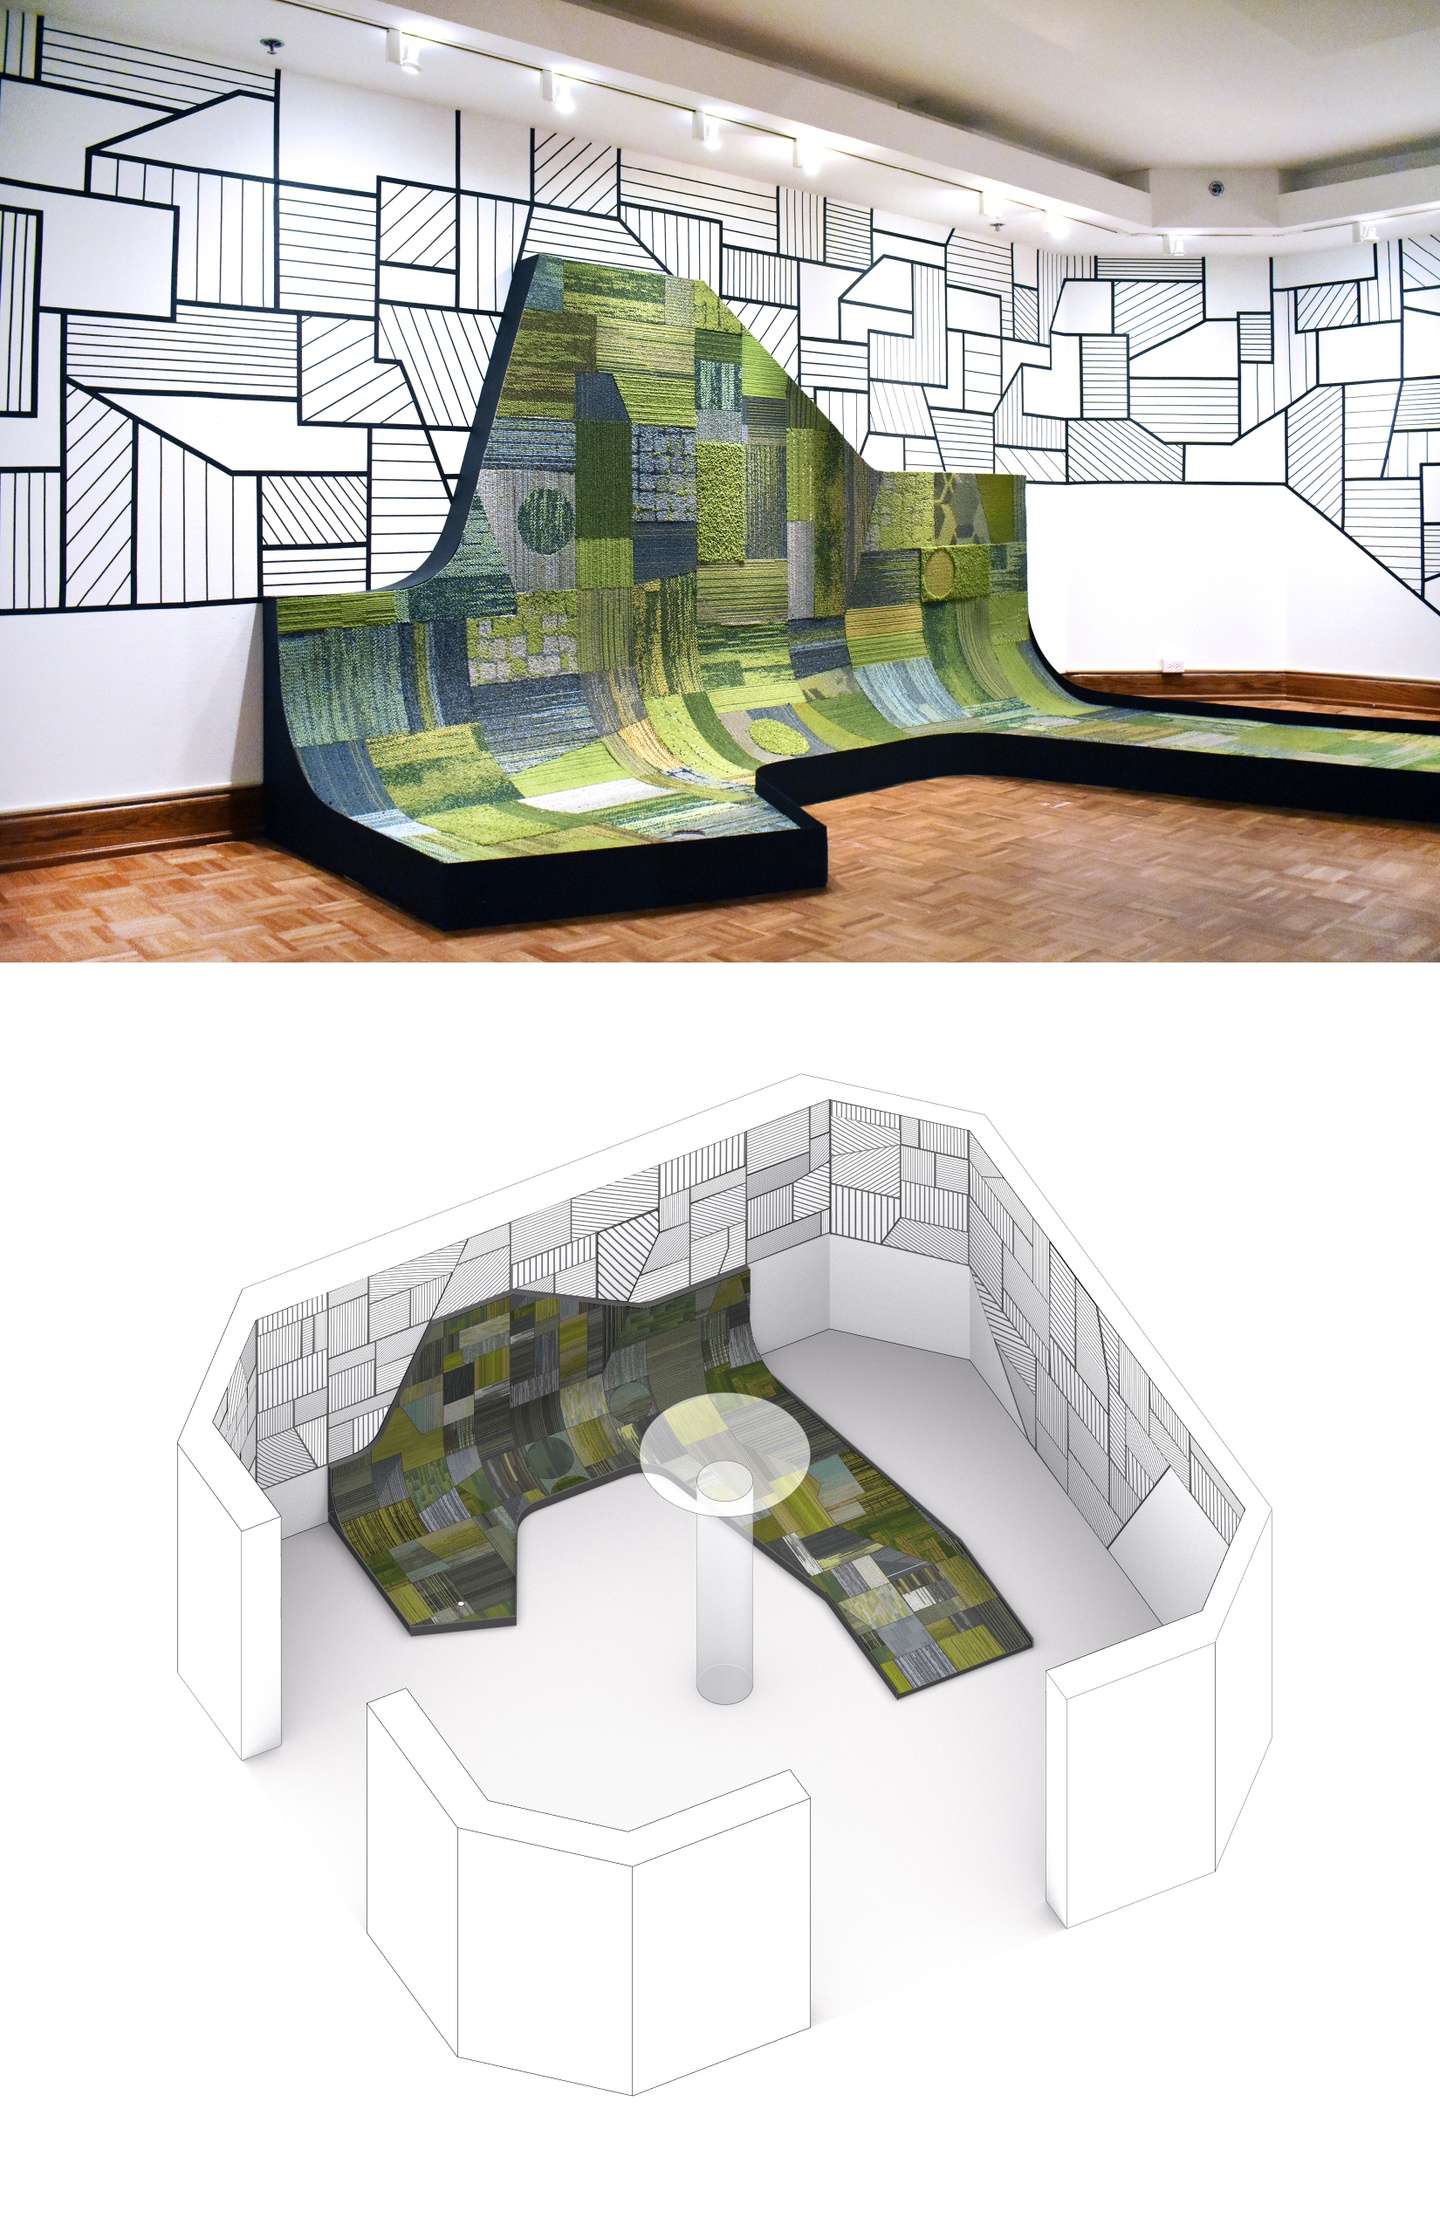 Installation (above is photograph of piece) and (below is rendering of installation in gallery space)